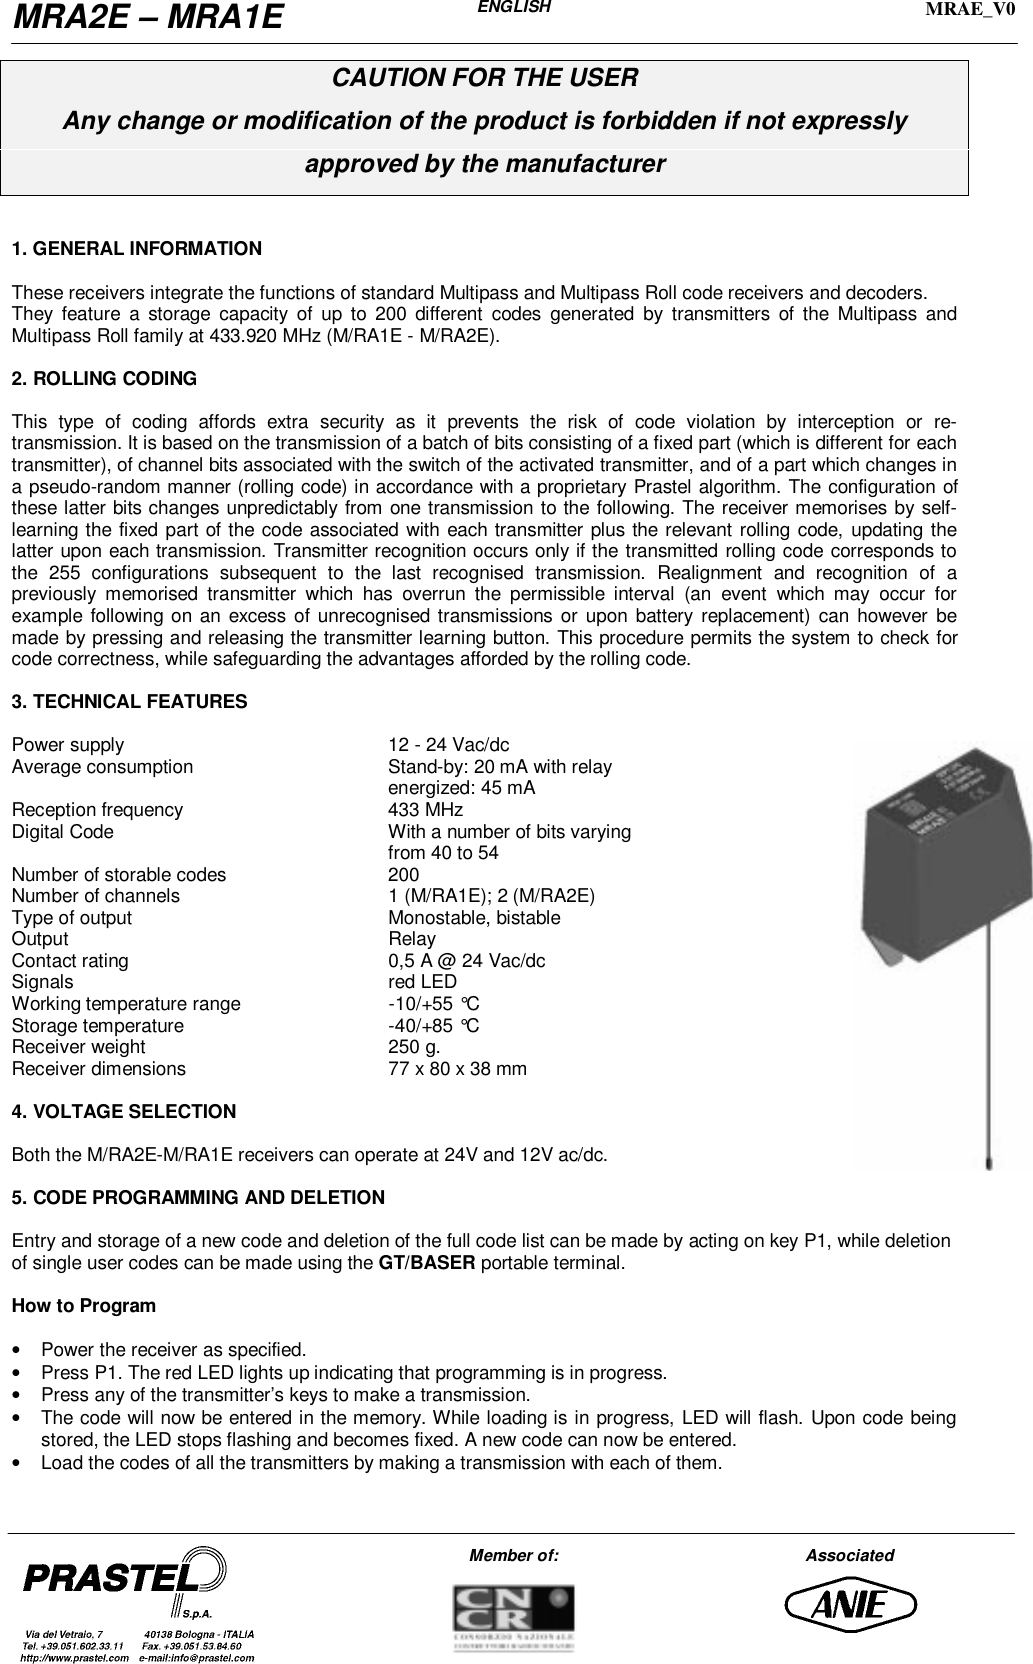 MRA2E – MRA1EENGLISHMRAE_V0Member of: AssociatedCAUTION FOR THE USERAny change or modification of the product is forbidden if not expresslyapproved by the manufacturer1. GENERAL INFORMATIONThese receivers integrate the functions of standard Multipass and Multipass Roll code receivers and decoders.They feature a storage capacity of up to 200 different codes generated by transmitters of the Multipass andMultipass Roll family at 433.920 MHz (M/RA1E - M/RA2E).2. ROLLING CODINGThis type of coding affords extra security as it prevents the risk of code violation by interception or re-transmission. It is based on the transmission of a batch of bits consisting of a fixed part (which is different for eachtransmitter), of channel bits associated with the switch of the activated transmitter, and of a part which changes ina pseudo-random manner (rolling code) in accordance with a proprietary Prastel algorithm. The configuration ofthese latter bits changes unpredictably from one transmission to the following. The receiver memorises by self-learning the fixed part of the code associated with each transmitter plus the relevant rolling code, updating thelatter upon each transmission. Transmitter recognition occurs only if the transmitted rolling code corresponds tothe 255 configurations subsequent to the last recognised transmission. Realignment and recognition of apreviously memorised transmitter which has overrun the permissible interval (an event which may occur forexample following on an excess of unrecognised transmissions or upon battery replacement) can however bemade by pressing and releasing the transmitter learning button. This procedure permits the system to check forcode correctness, while safeguarding the advantages afforded by the rolling code.3. TECHNICAL FEATURESPower supply 12 - 24 Vac/dcAverage consumption Stand-by: 20 mA with relayenergized: 45 mAReception frequency 433 MHzDigital Code With a number of bits varyingfrom 40 to 54Number of storable codes 200Number of channels 1 (M/RA1E); 2 (M/RA2E)Type of output Monostable, bistableOutput RelayContact rating 0,5 A @ 24 Vac/dcSignals red LEDWorking temperature range -10/+55 °CStorage temperature -40/+85 °CReceiver weight 250 g.Receiver dimensions 77 x 80 x 38 mm4. VOLTAGE SELECTIONBoth the M/RA2E-M/RA1E receivers can operate at 24V and 12V ac/dc.5. CODE PROGRAMMING AND DELETIONEntry and storage of a new code and deletion of the full code list can be made by acting on key P1, while deletionof single user codes can be made using the GT/BASER portable terminal.How to Program•  Power the receiver as specified.•  Press P1. The red LED lights up indicating that programming is in progress.•  Press any of the transmitter’s keys to make a transmission.•  The code will now be entered in the memory. While loading is in progress, LED will flash. Upon code beingstored, the LED stops flashing and becomes fixed. A new code can now be entered.•  Load the codes of all the transmitters by making a transmission with each of them.